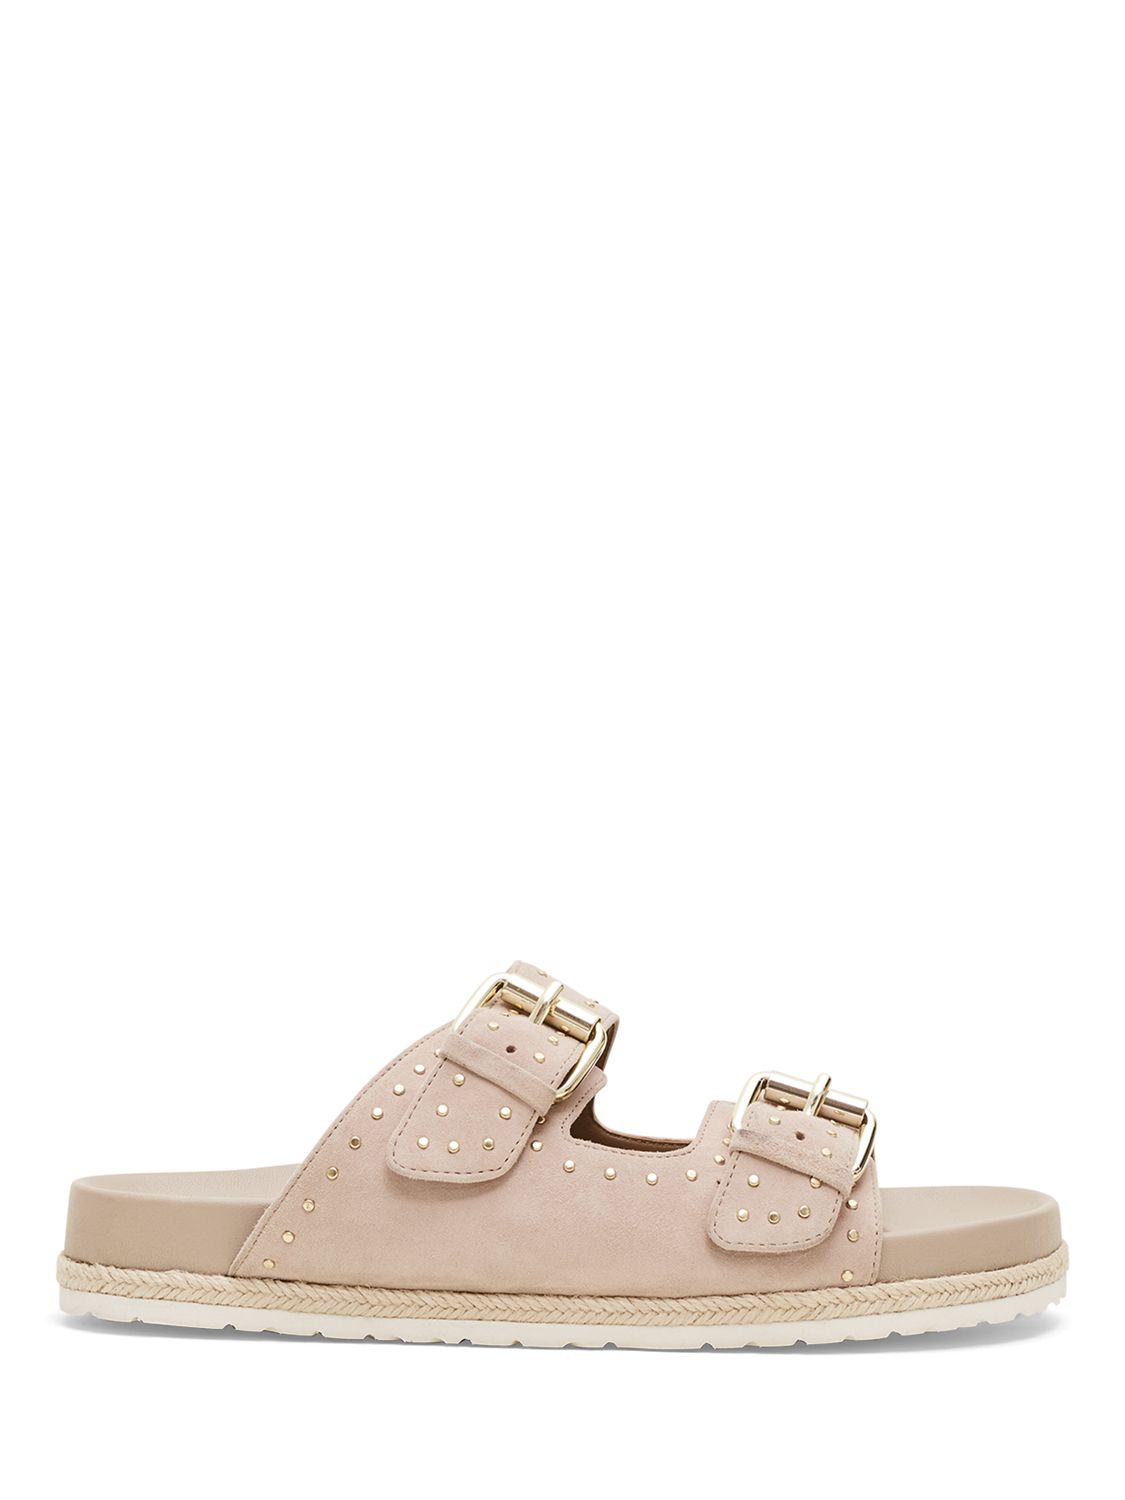 Phase Eight Double Buckle Sandals, Natural at John Lewis & Partners